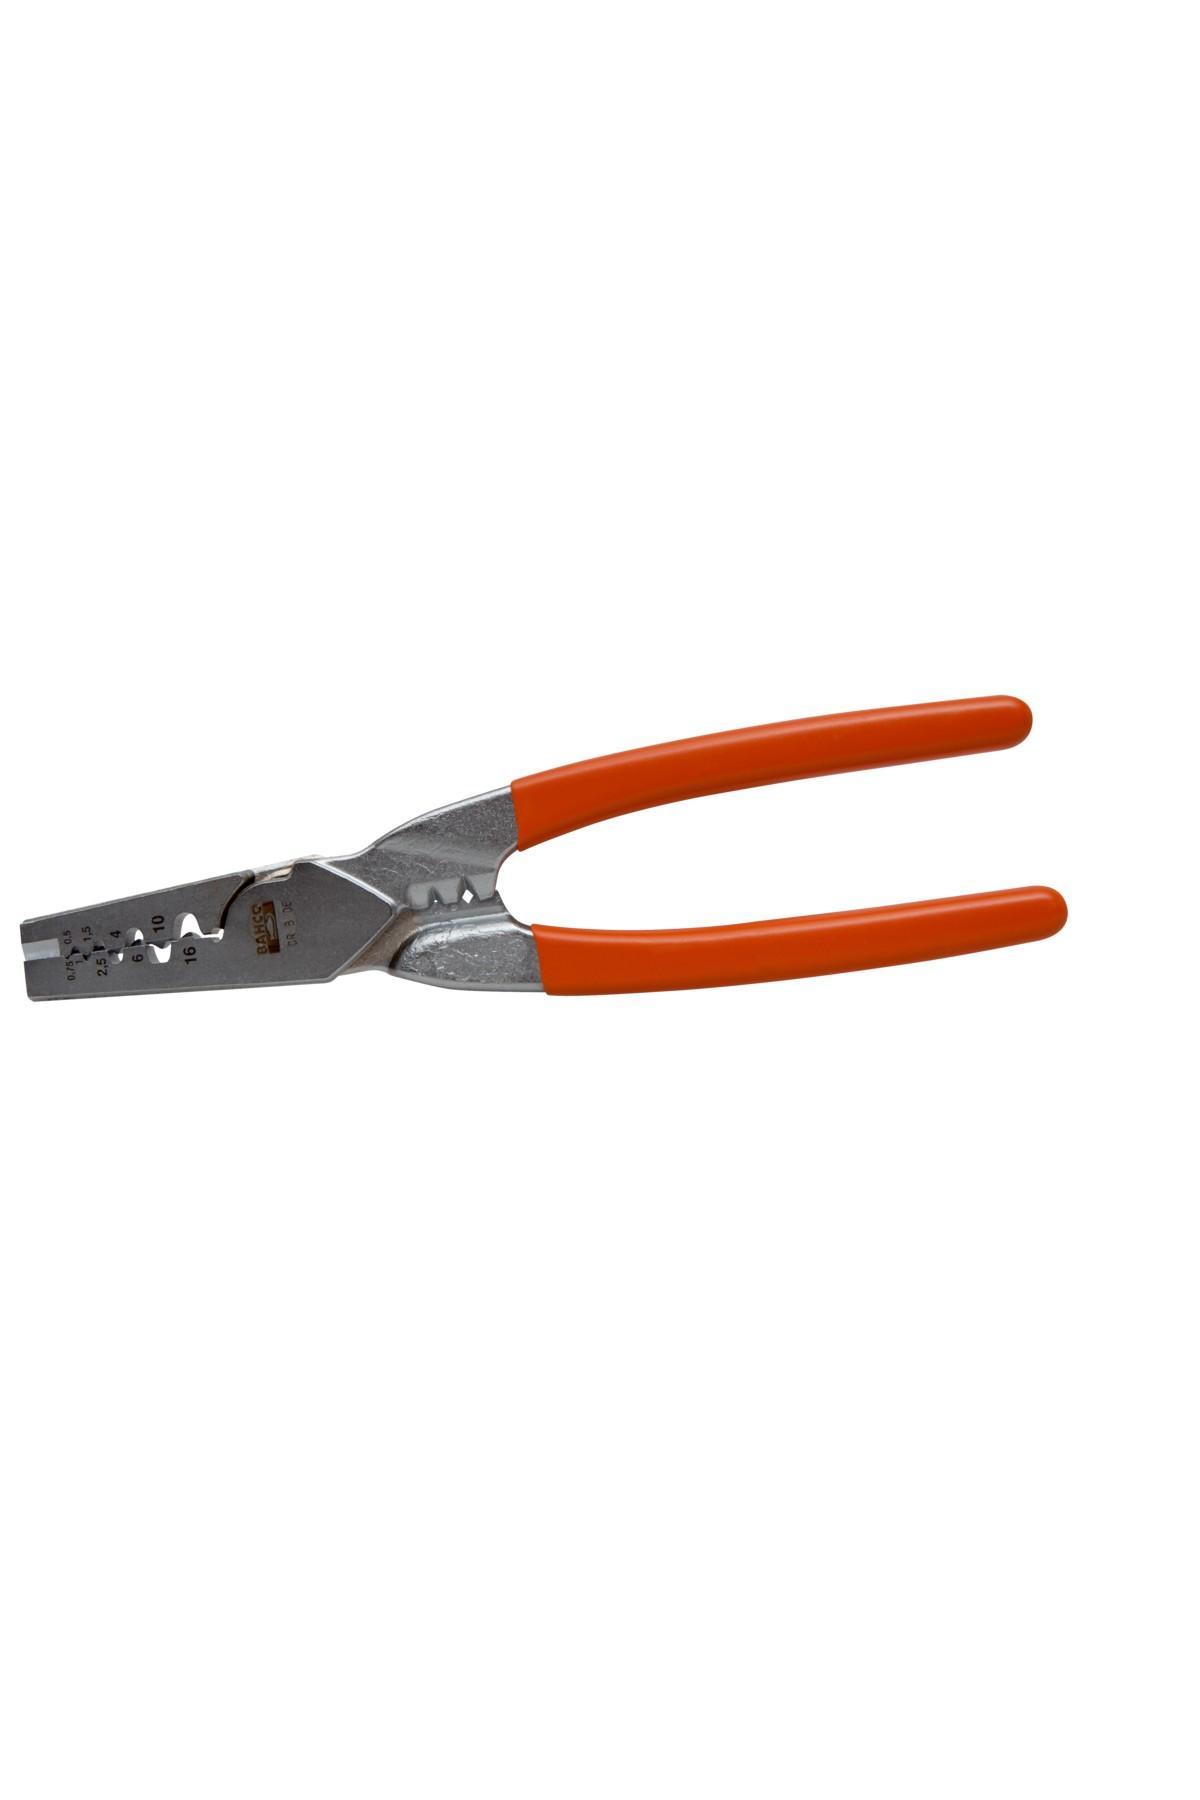 Crimping pliers for cable connectors 0.5-16 mm²